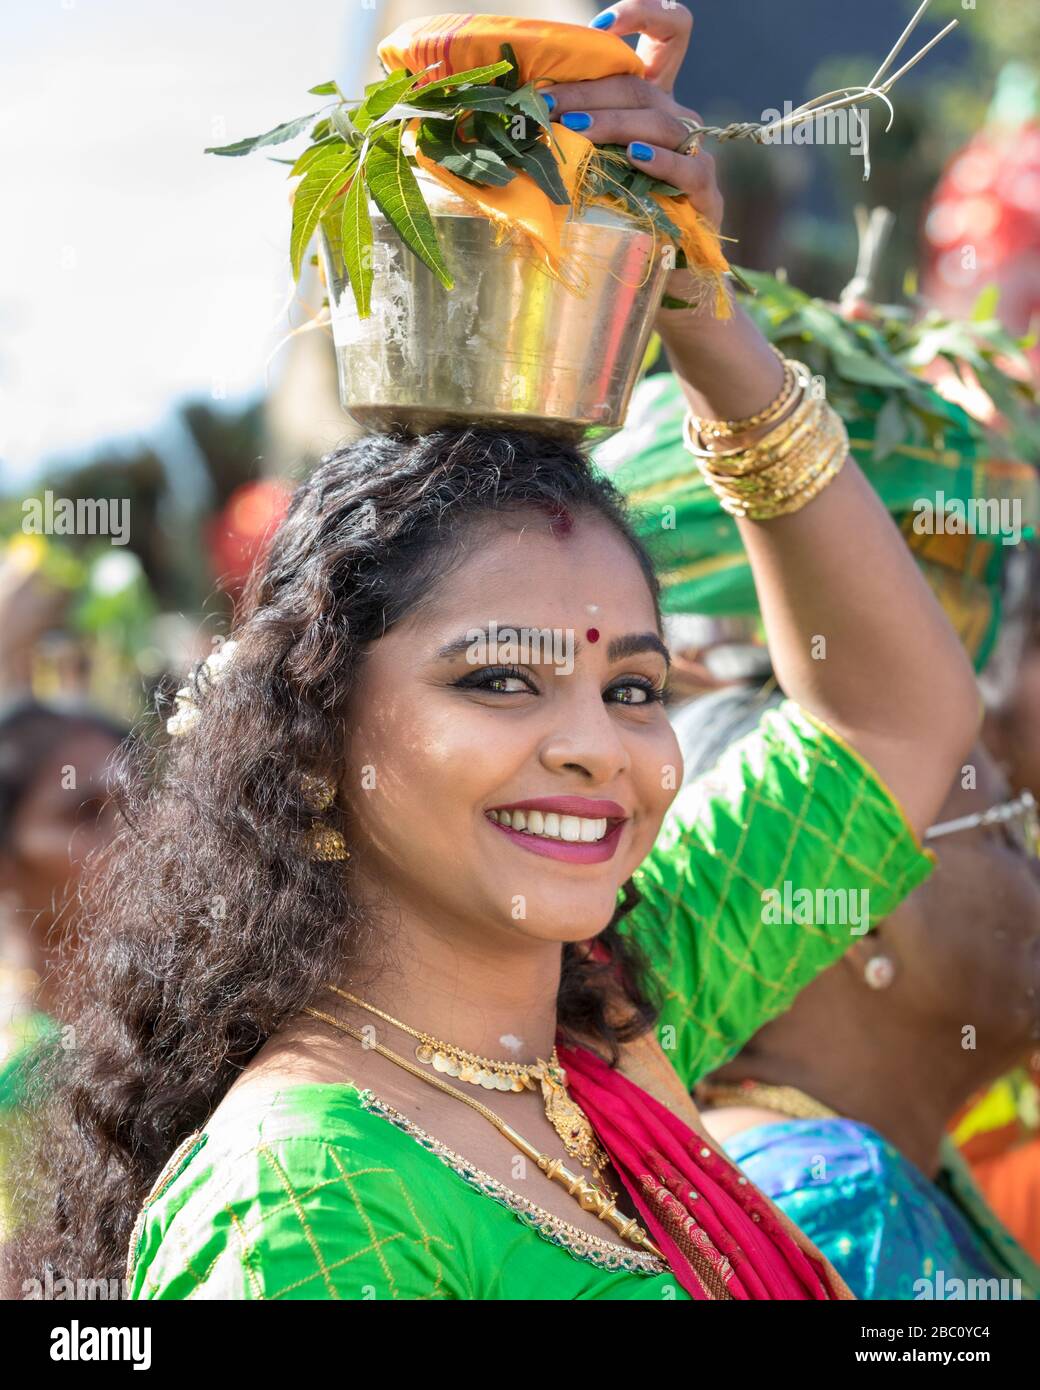 Young Hindu  in sari, smiling as she participates in a  Chariot Festival procession, carries offering on her head Stock Photo